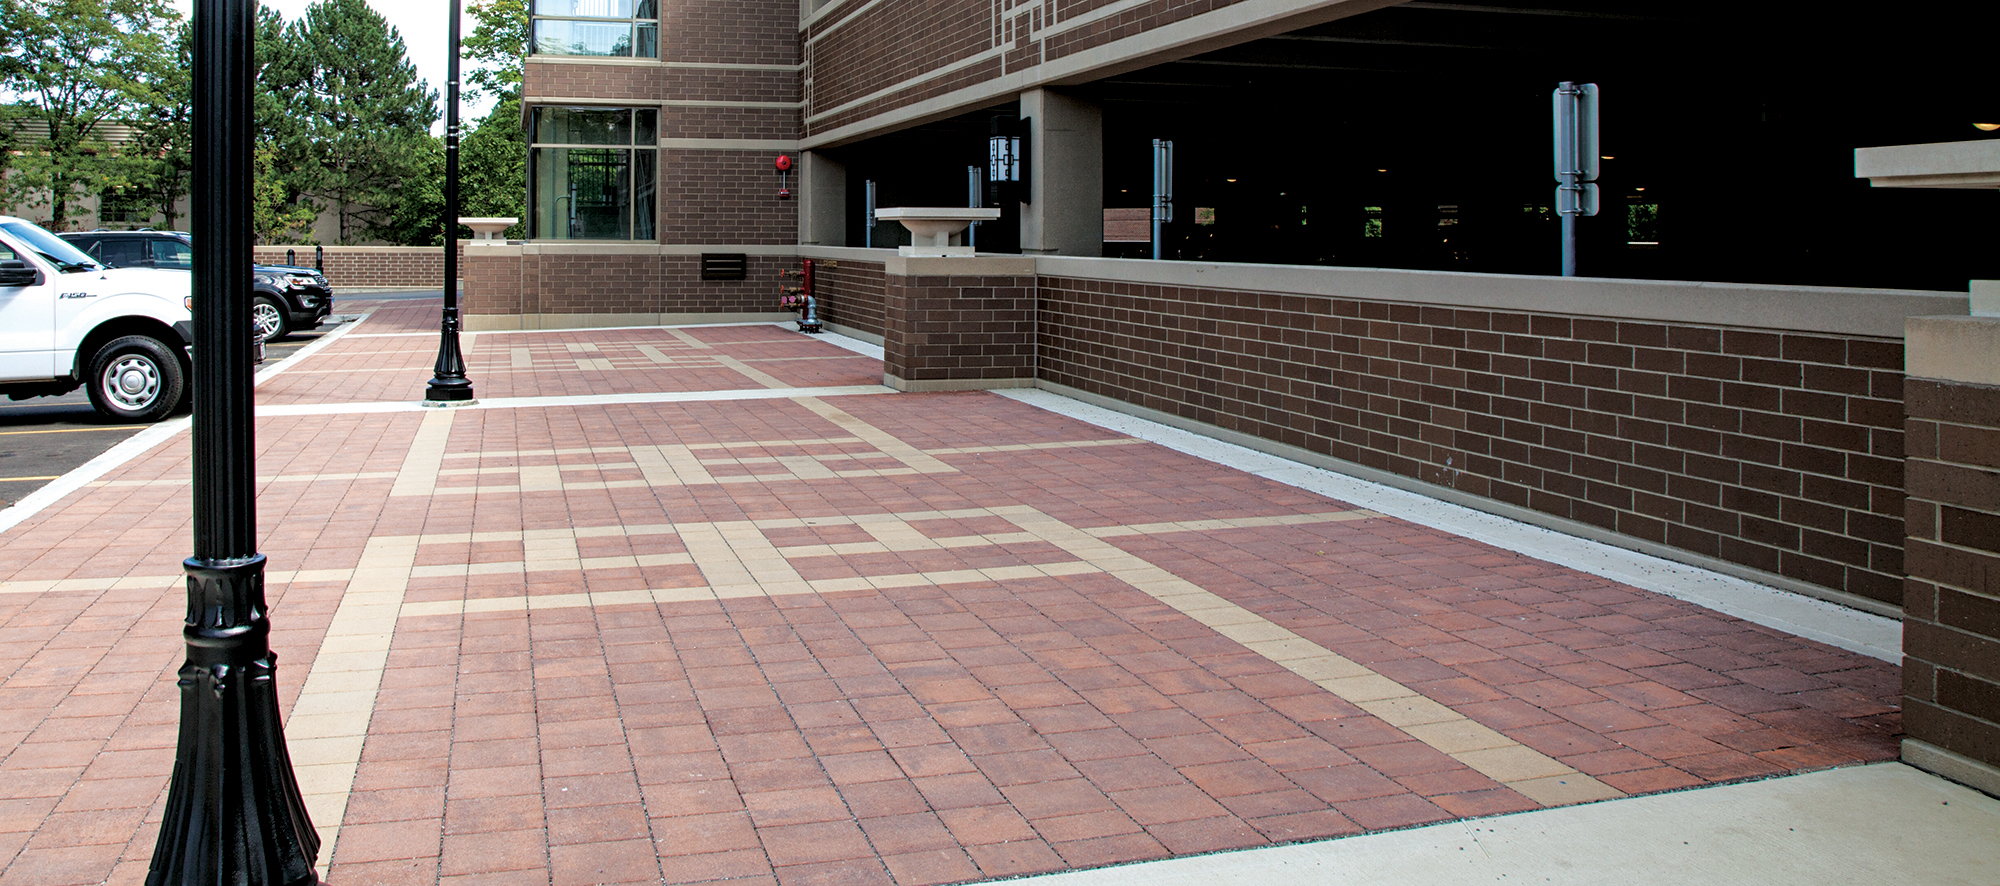 A sidewalk of red and beige patterned Eco-Priora pavers between cars parked in an outdoor lot and the wall of an enclosed parking garage.